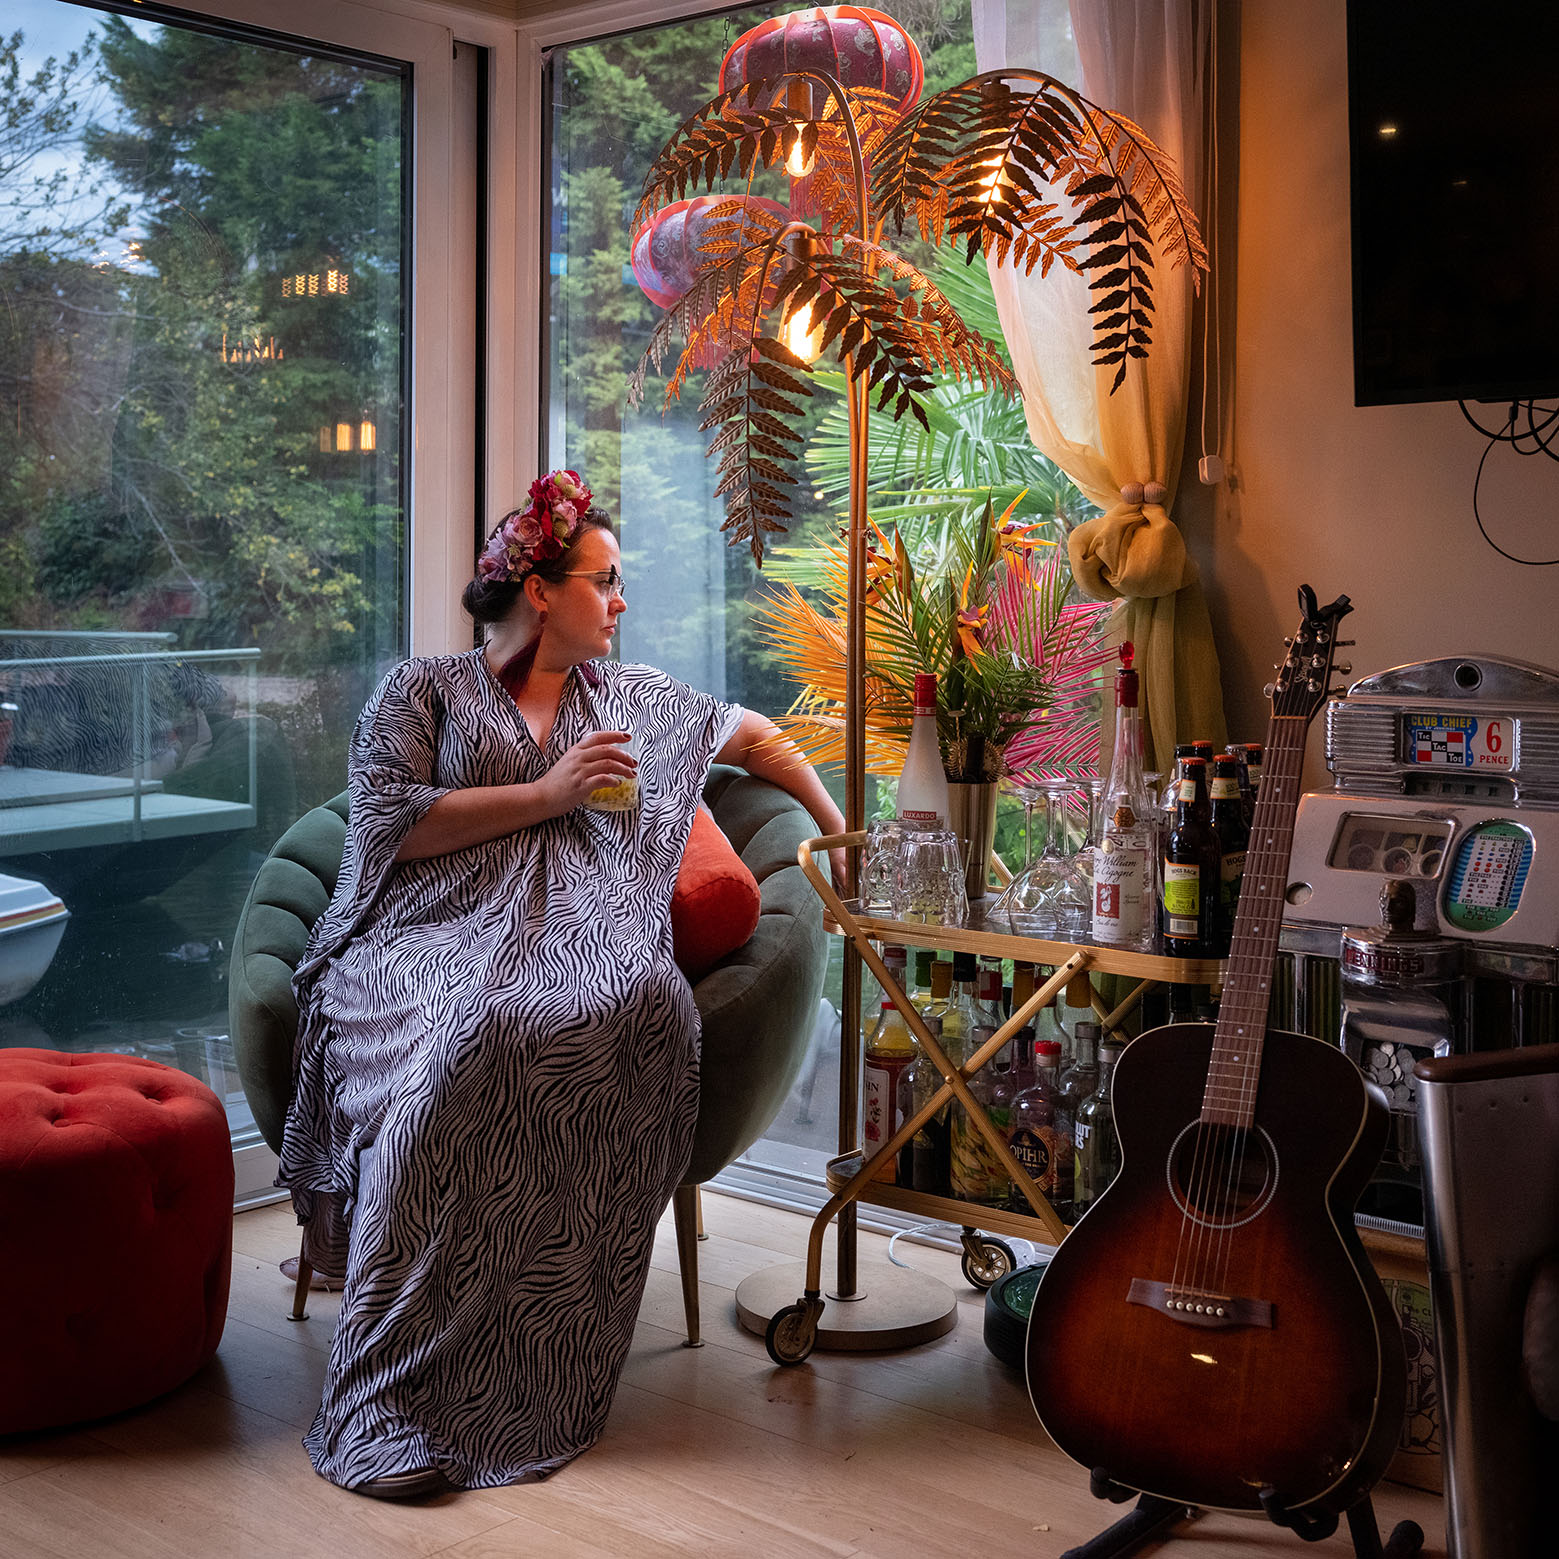 A woman in a zebra print dress sits in a plush chair by a window, holding a glass beneath a palm tree lamp. The room is softly light and there is a drinks cabinet and a guitar to the right.